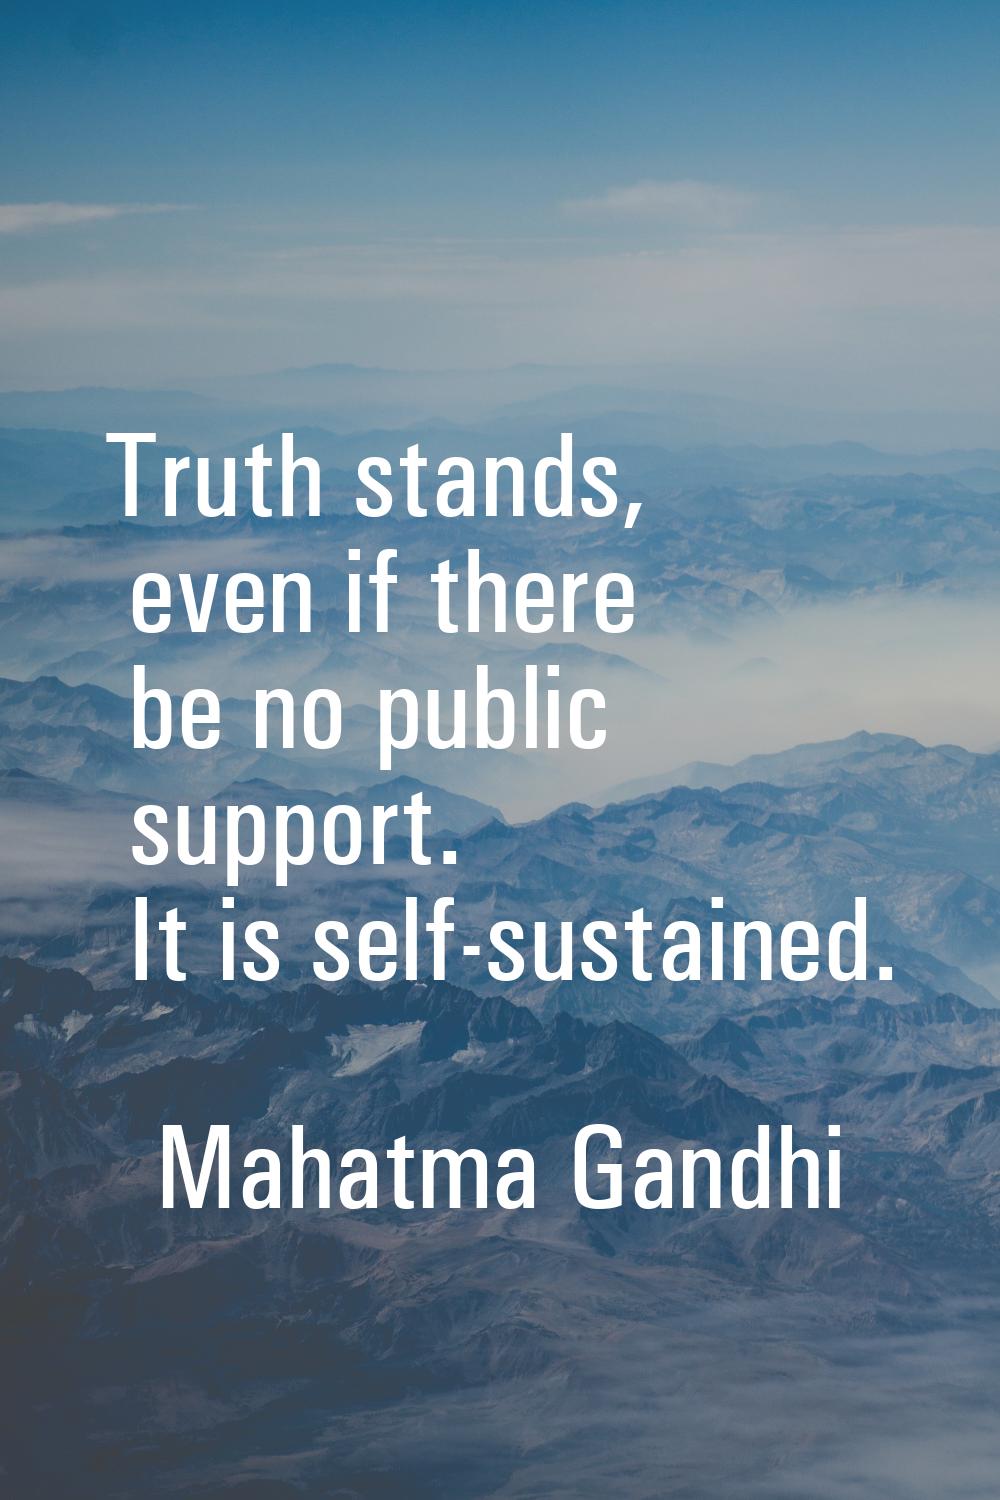 Truth stands, even if there be no public support. It is self-sustained.